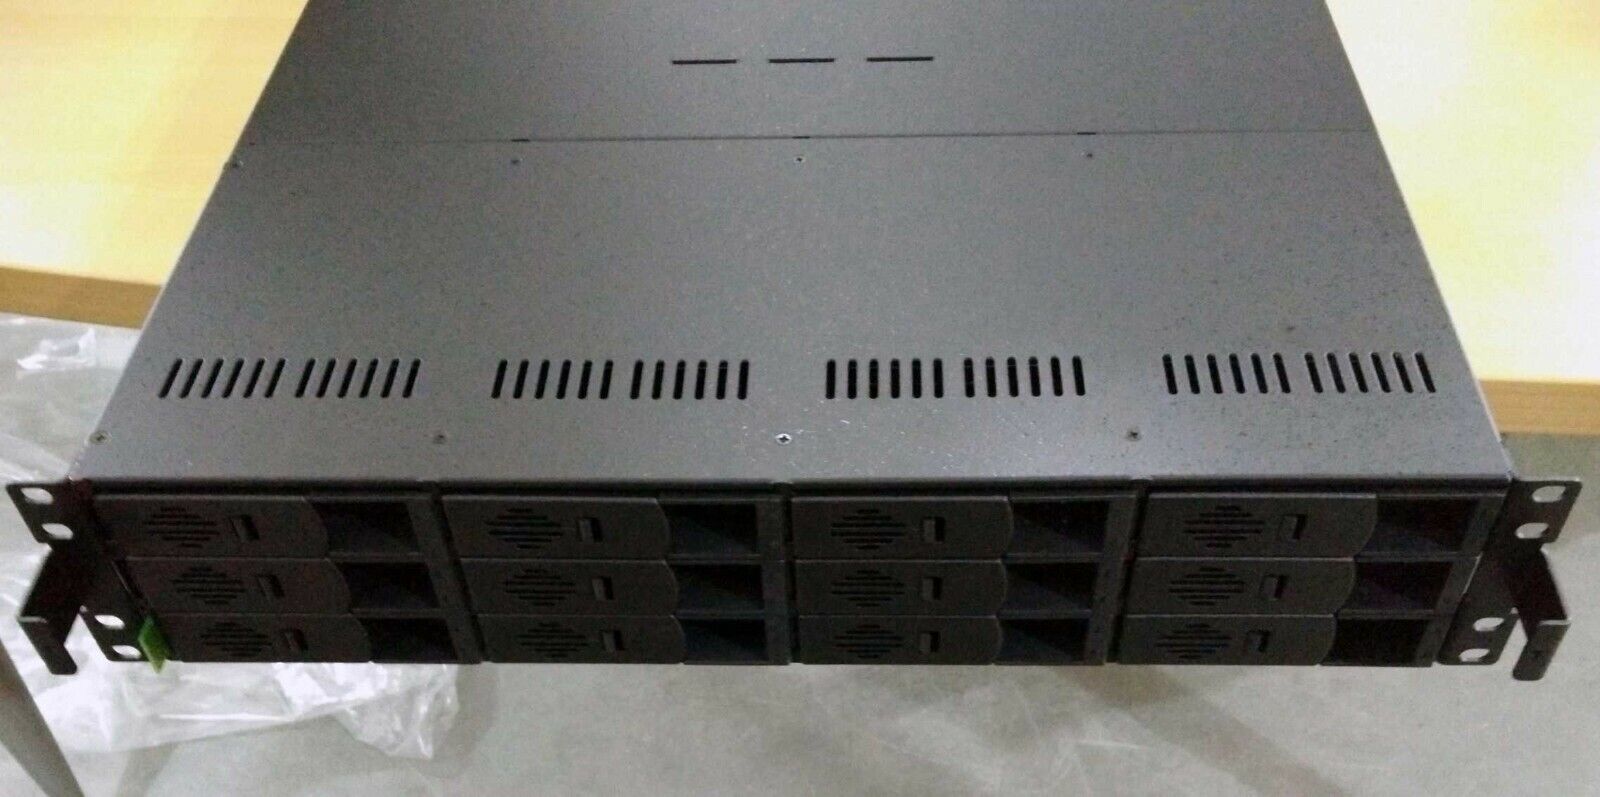 2U rackmount server case with 12 x hot swappable SATA + 2 x 2.5\